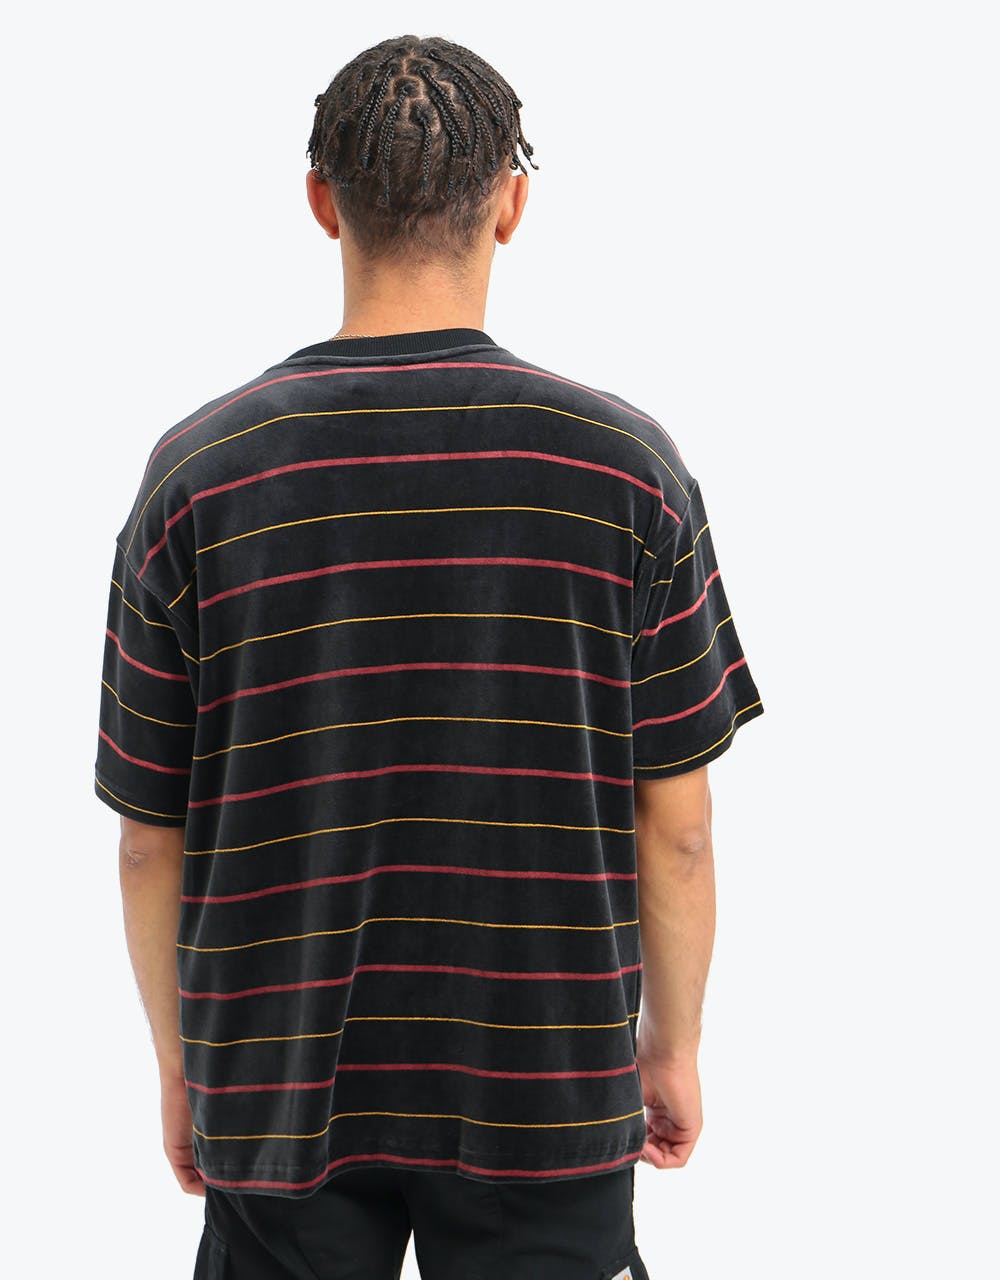 Adidas Velour Jersey T-Shirt - Black/Legacy Red/Legacy Gold/Off White